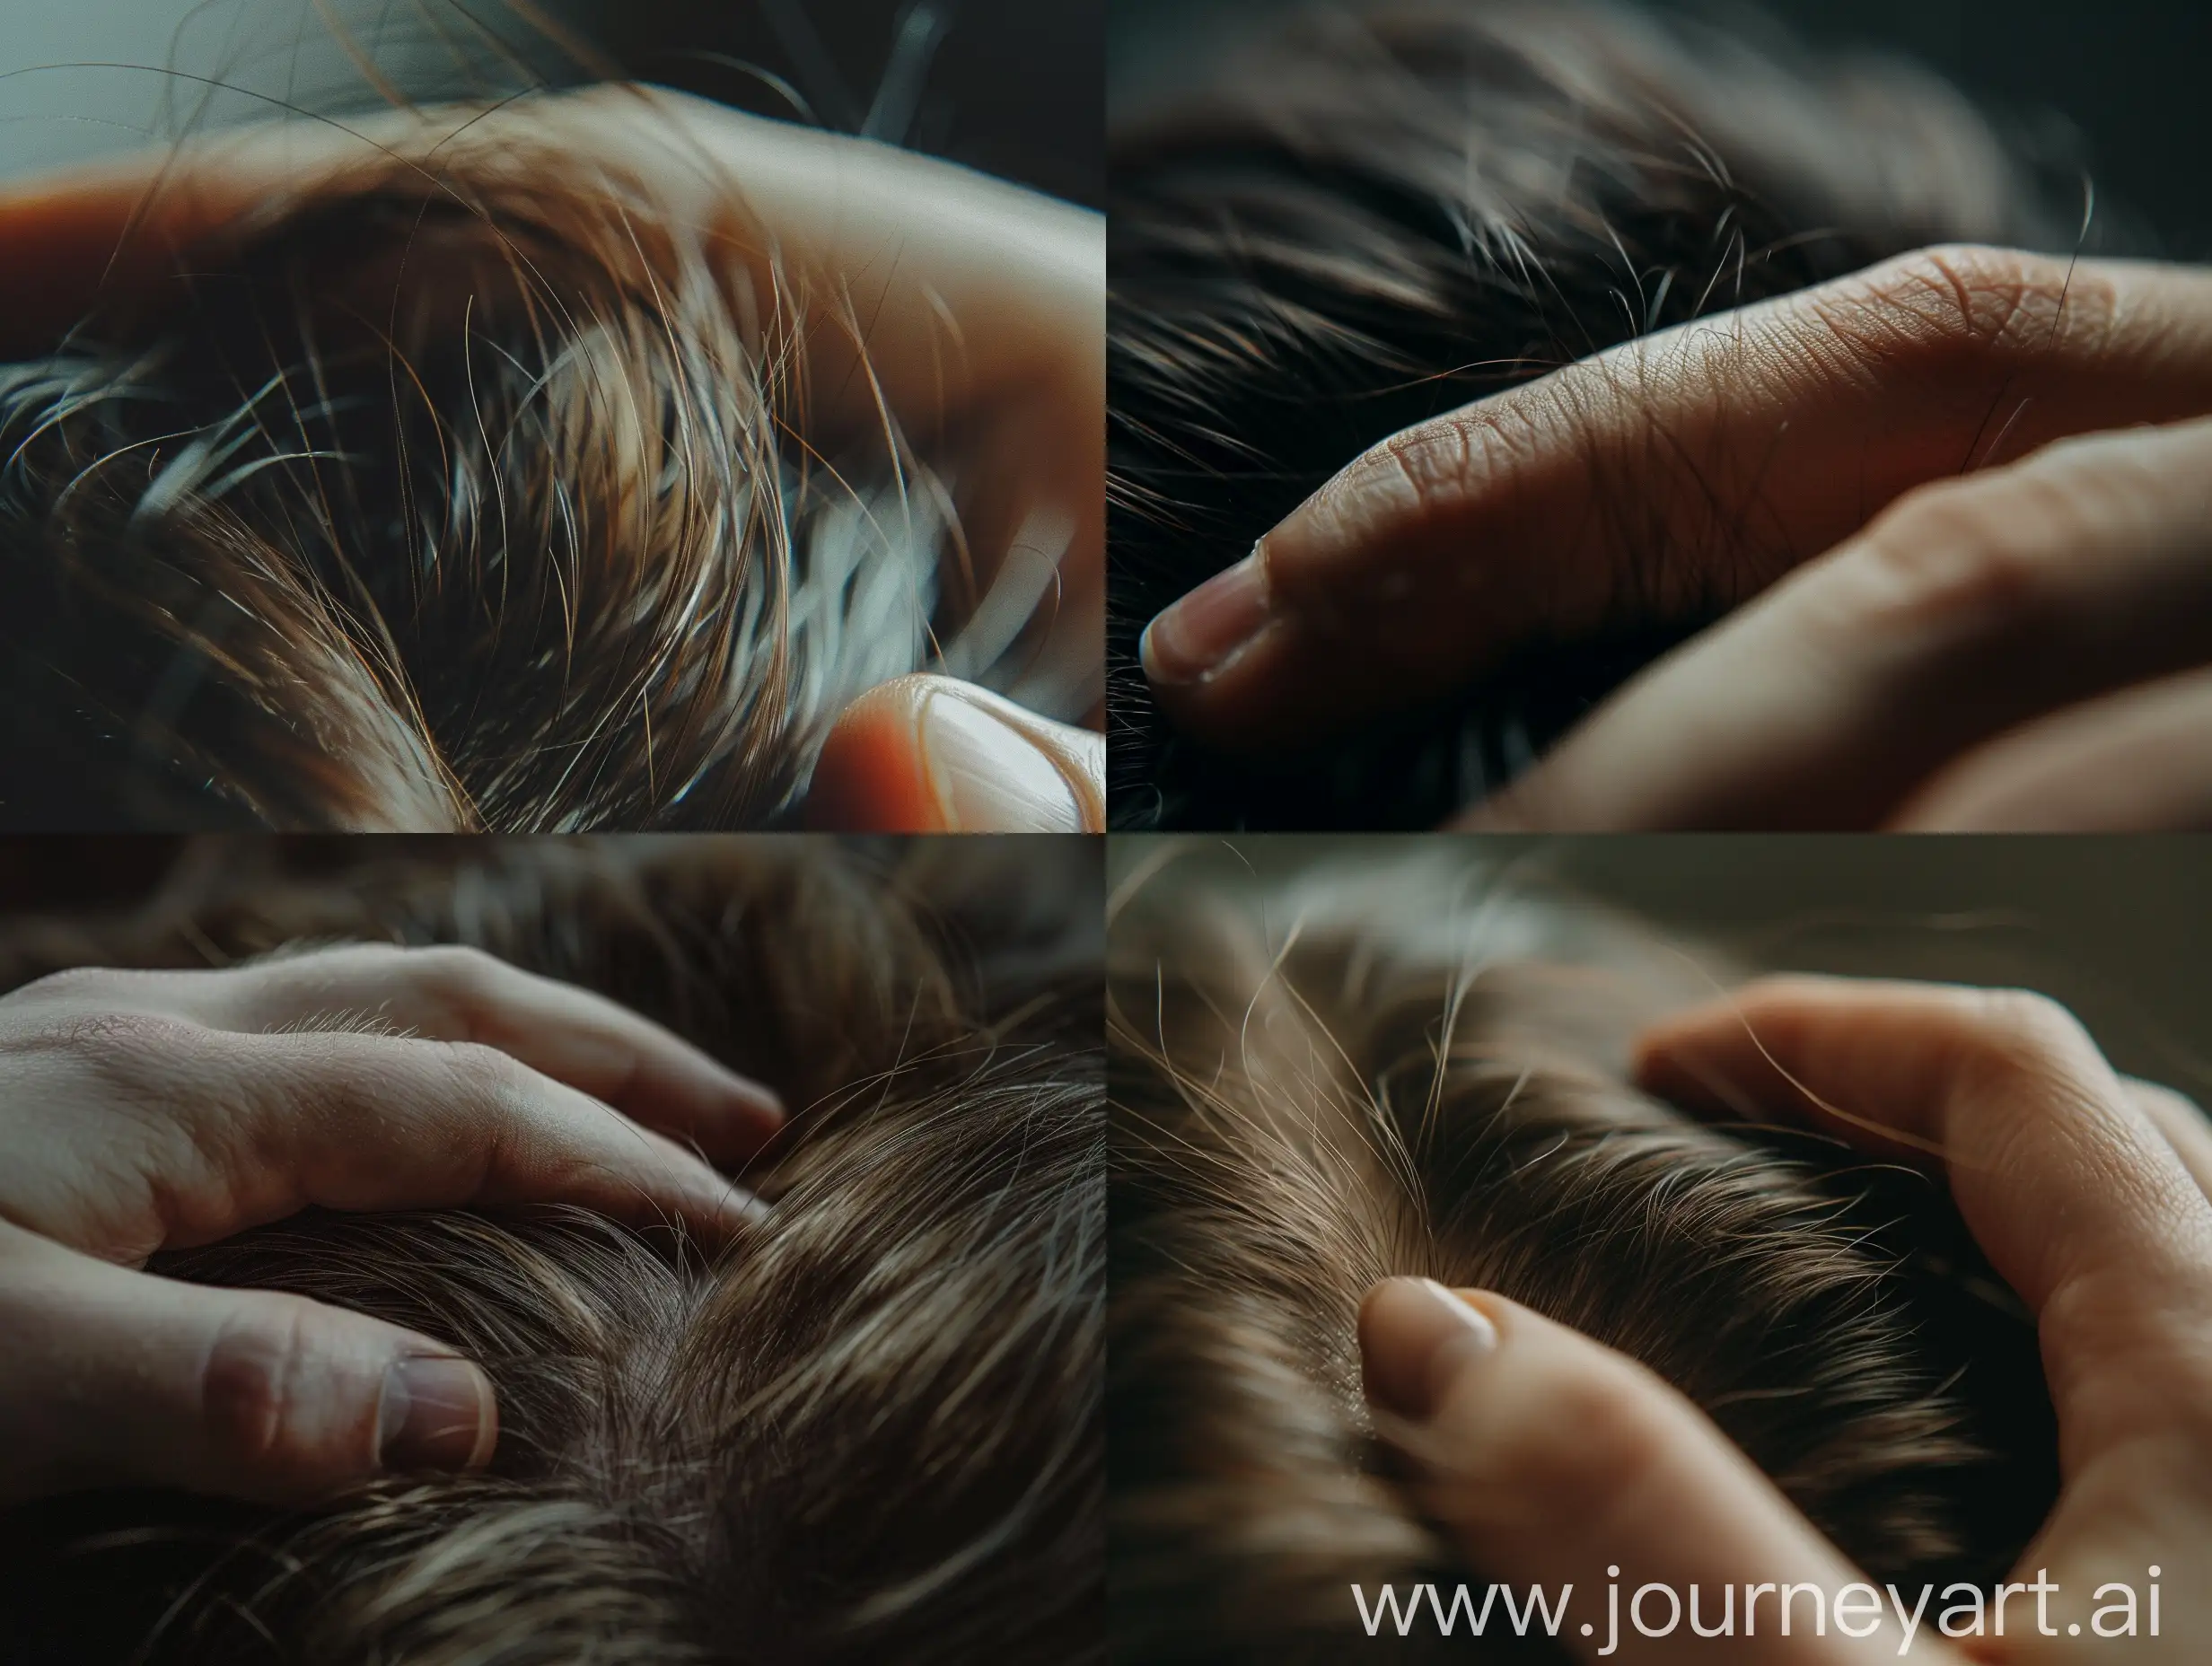 We see a close-up of a person’s hand gently touching their thinning hair. The focus is on the hand and hair, emphasizing the emotional connection. Camera Model: Arri Alexa Mini Shot Type: Close-up Lens Type: 50mm prime lens